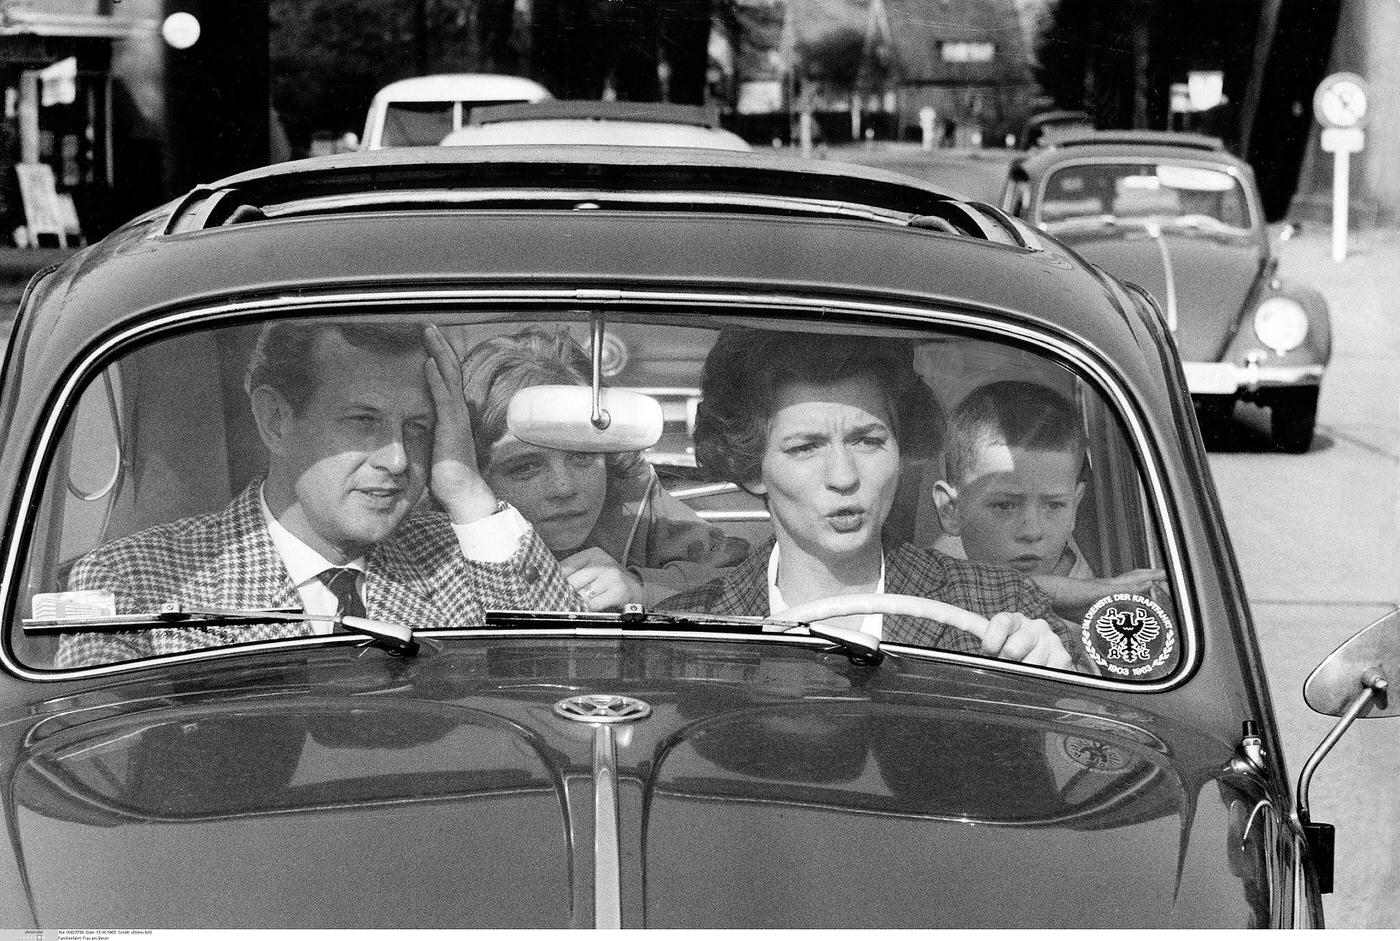 Family driving, critical moment captured. 1963.